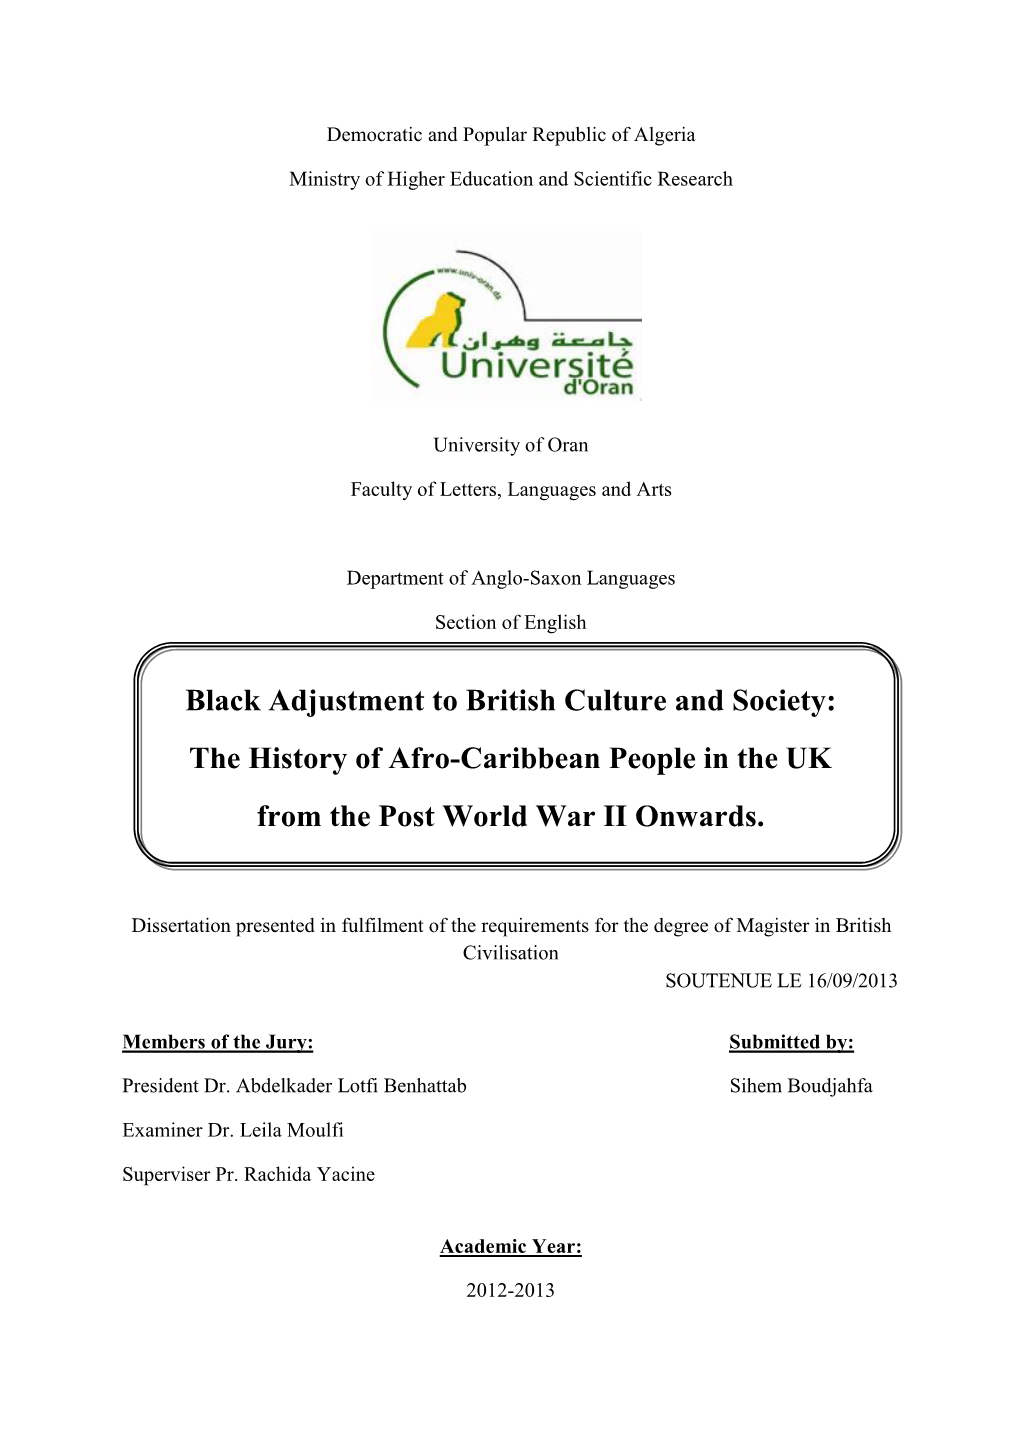 Black Adjustment to British Culture and Society: the History of Afro-Caribbean People in the UK from the Post World War II Onwards